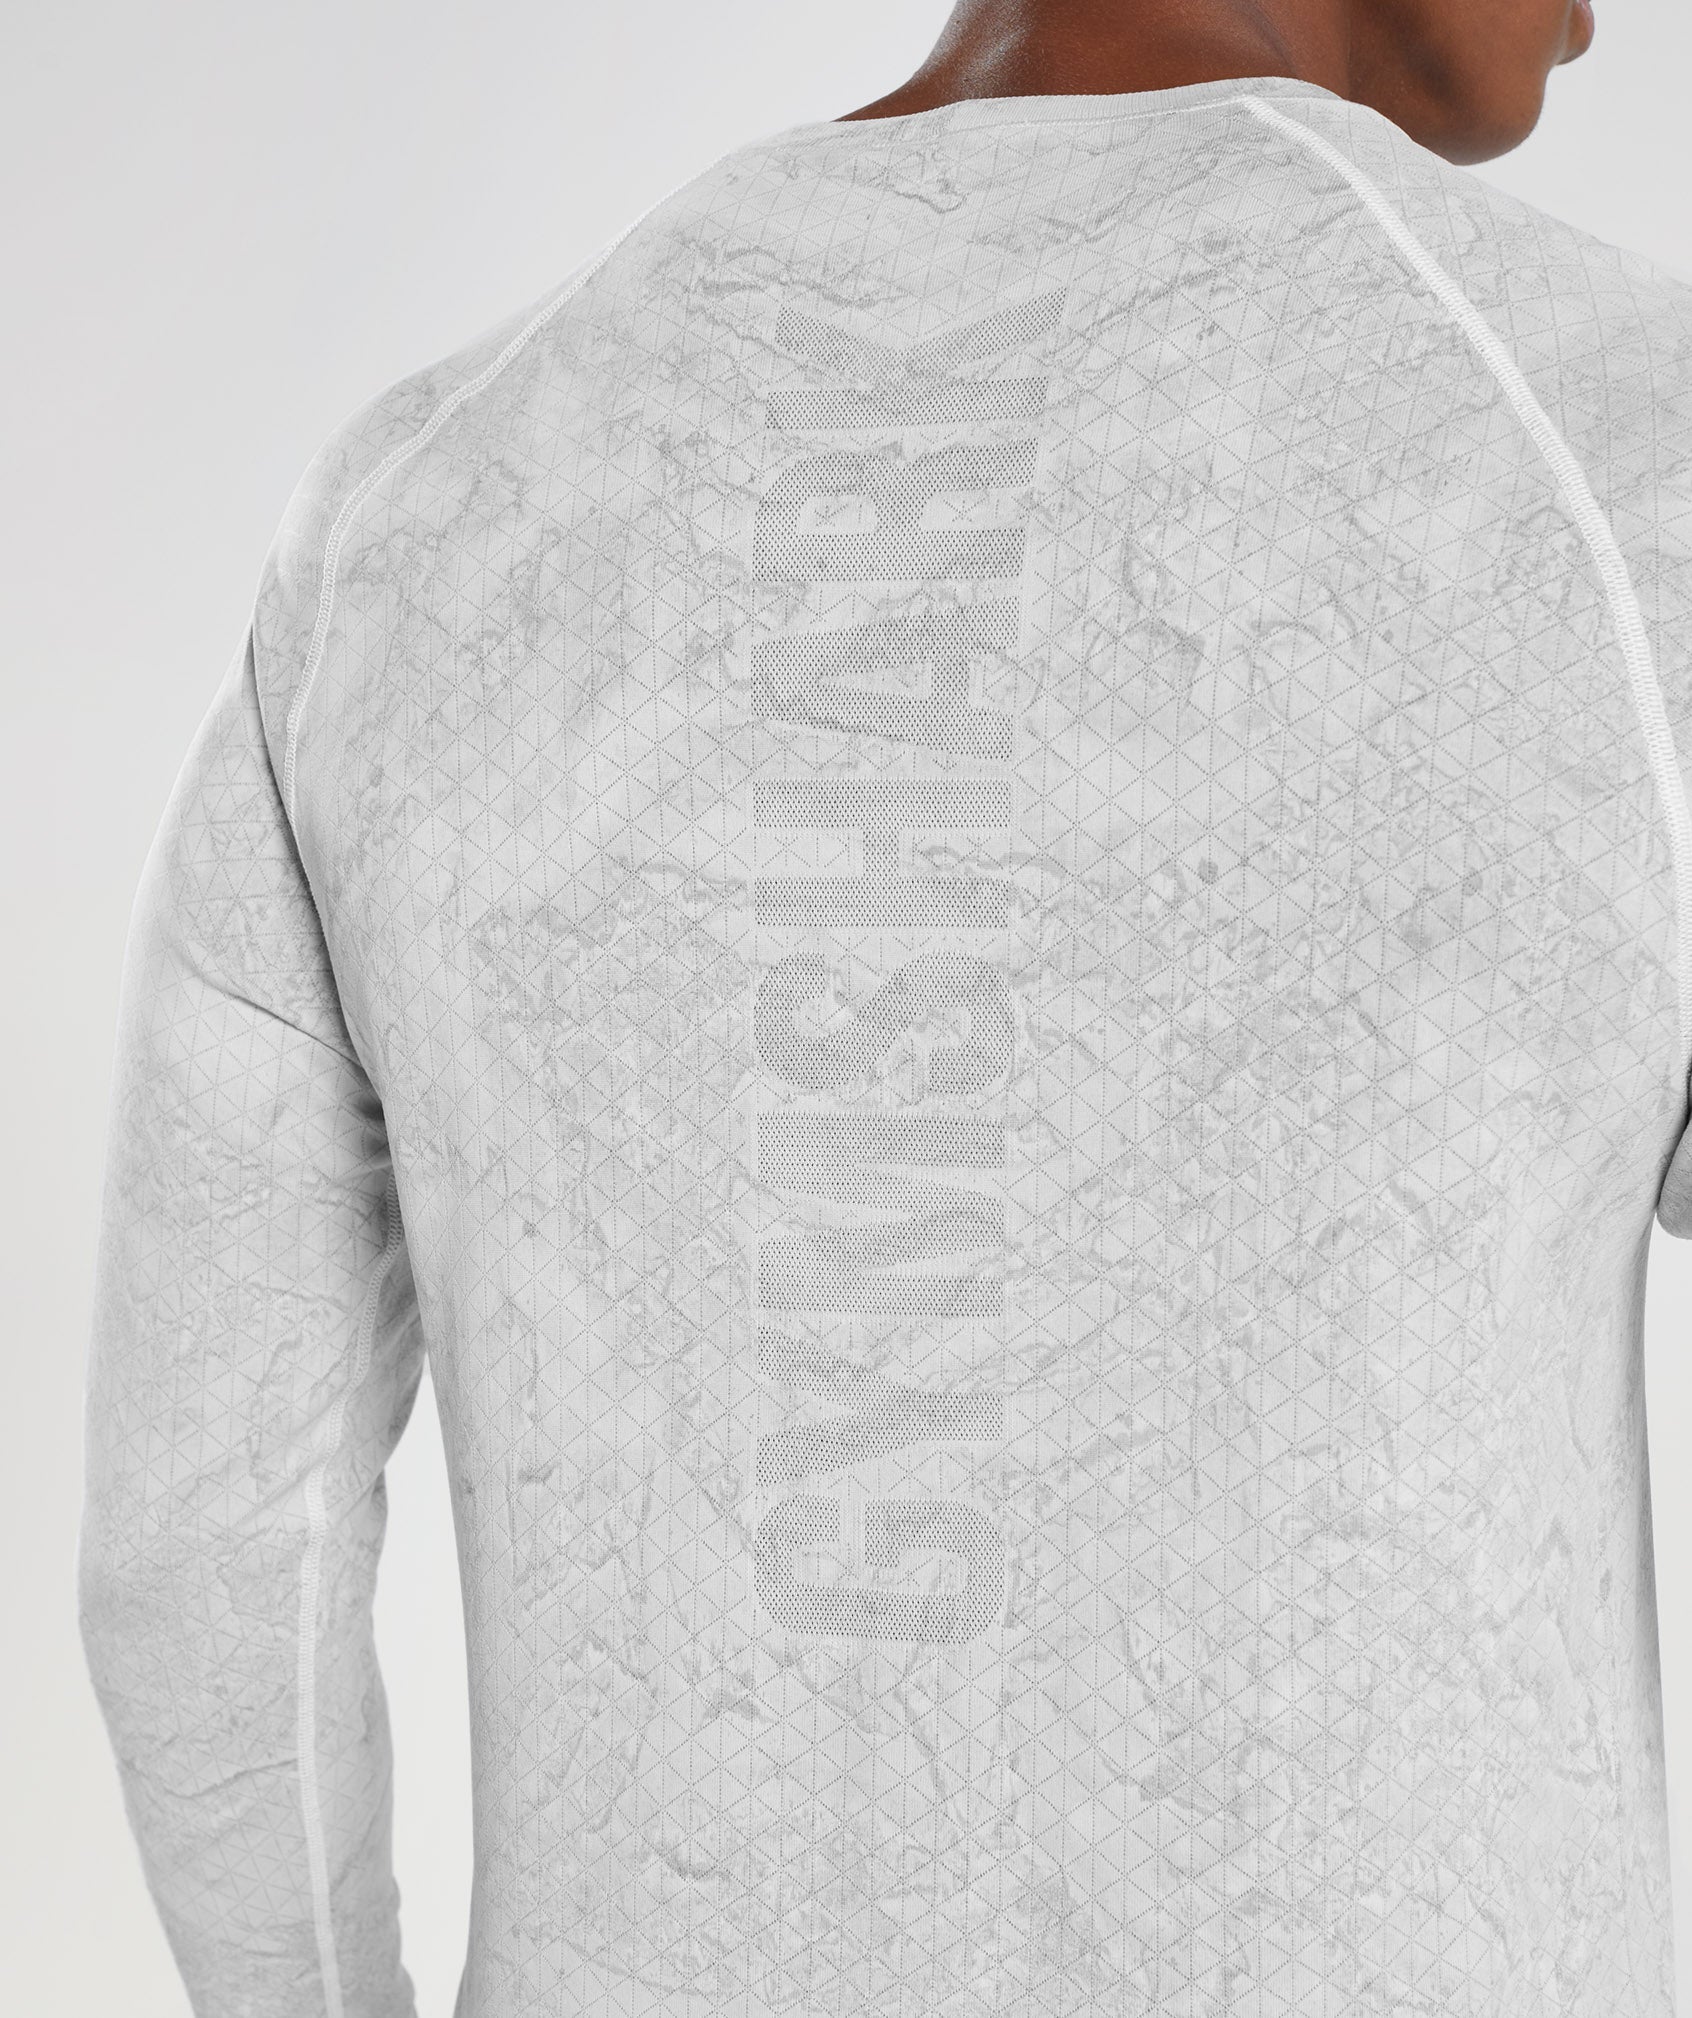 Geo Seamless Long Sleeve T-Shirt in White/Light Grey - view 5